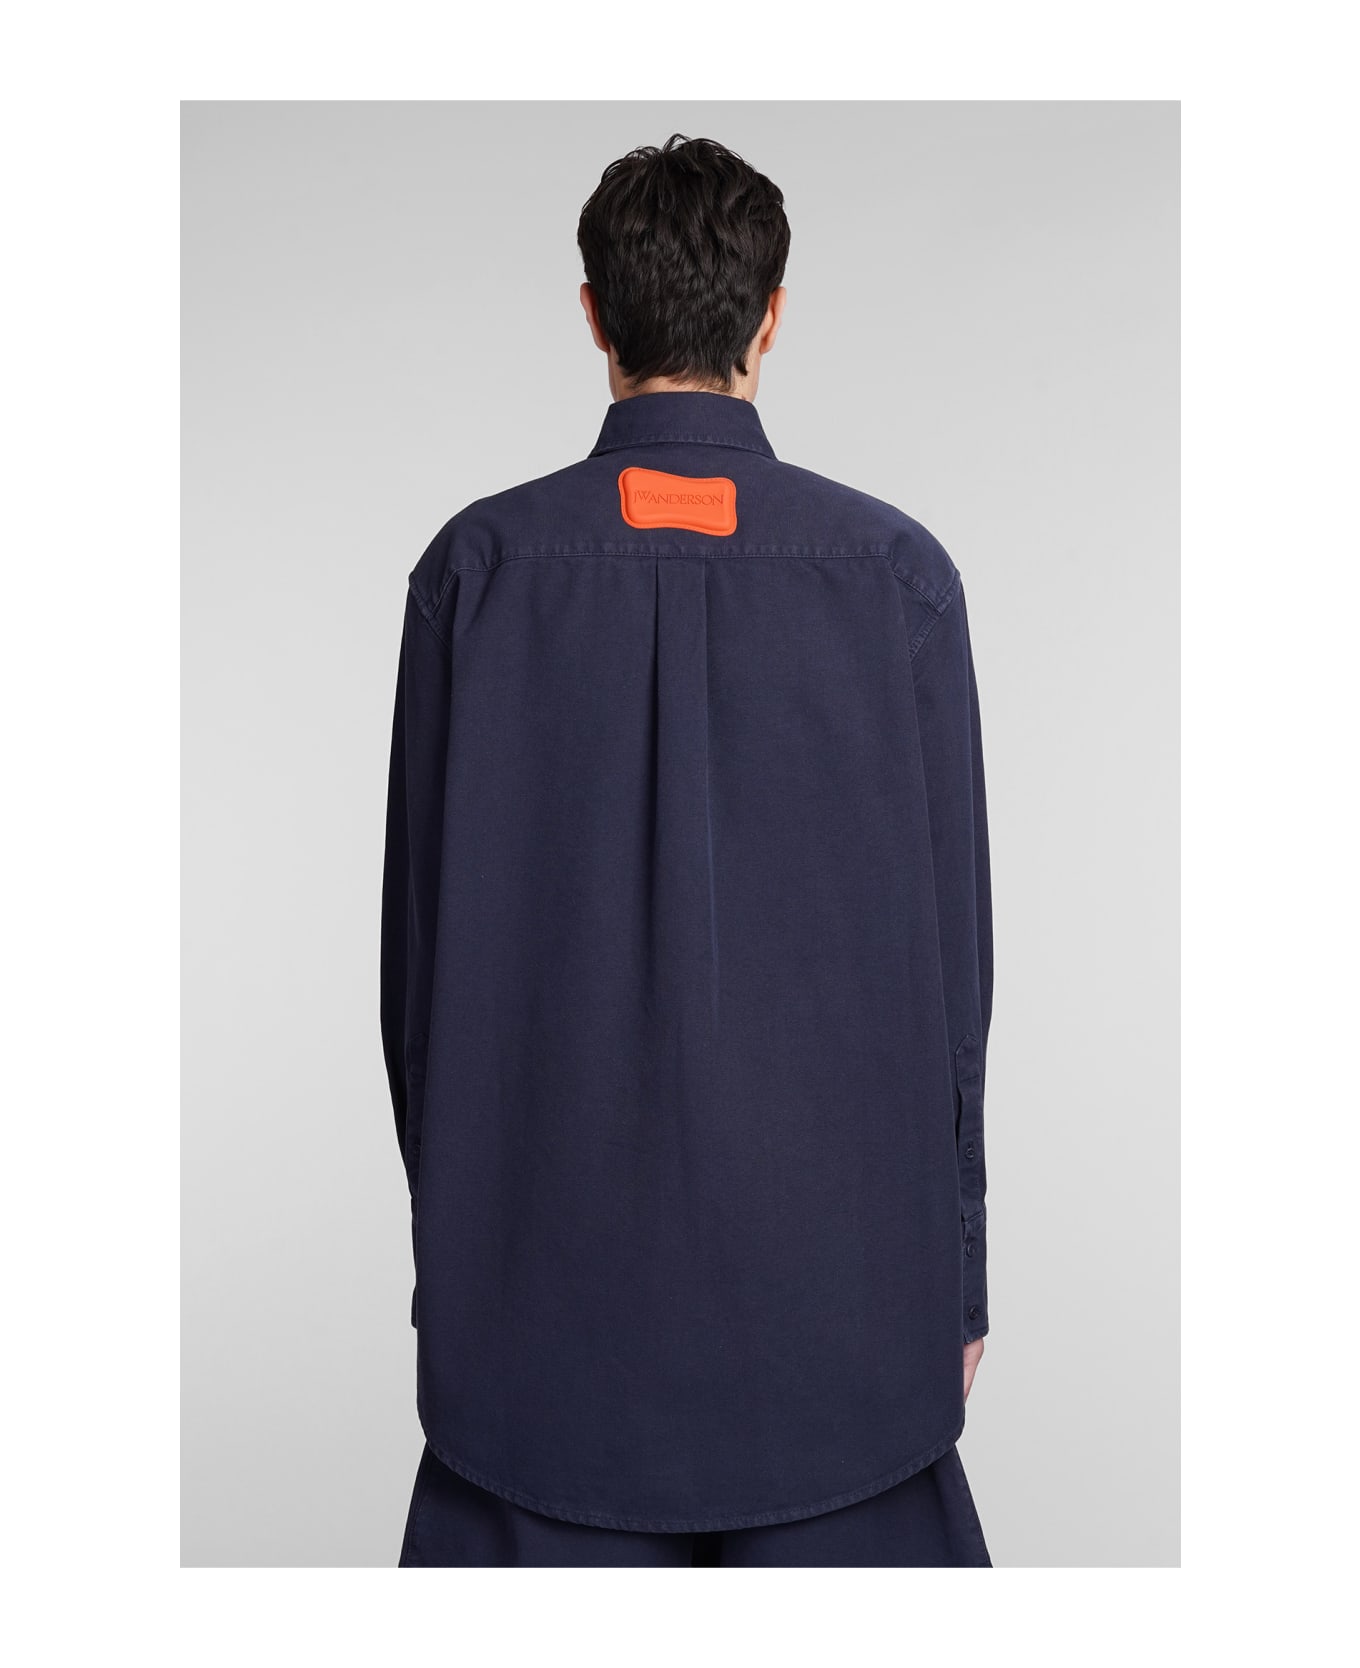 J.W. Anderson Shirt In Blue Cotton - BLUE